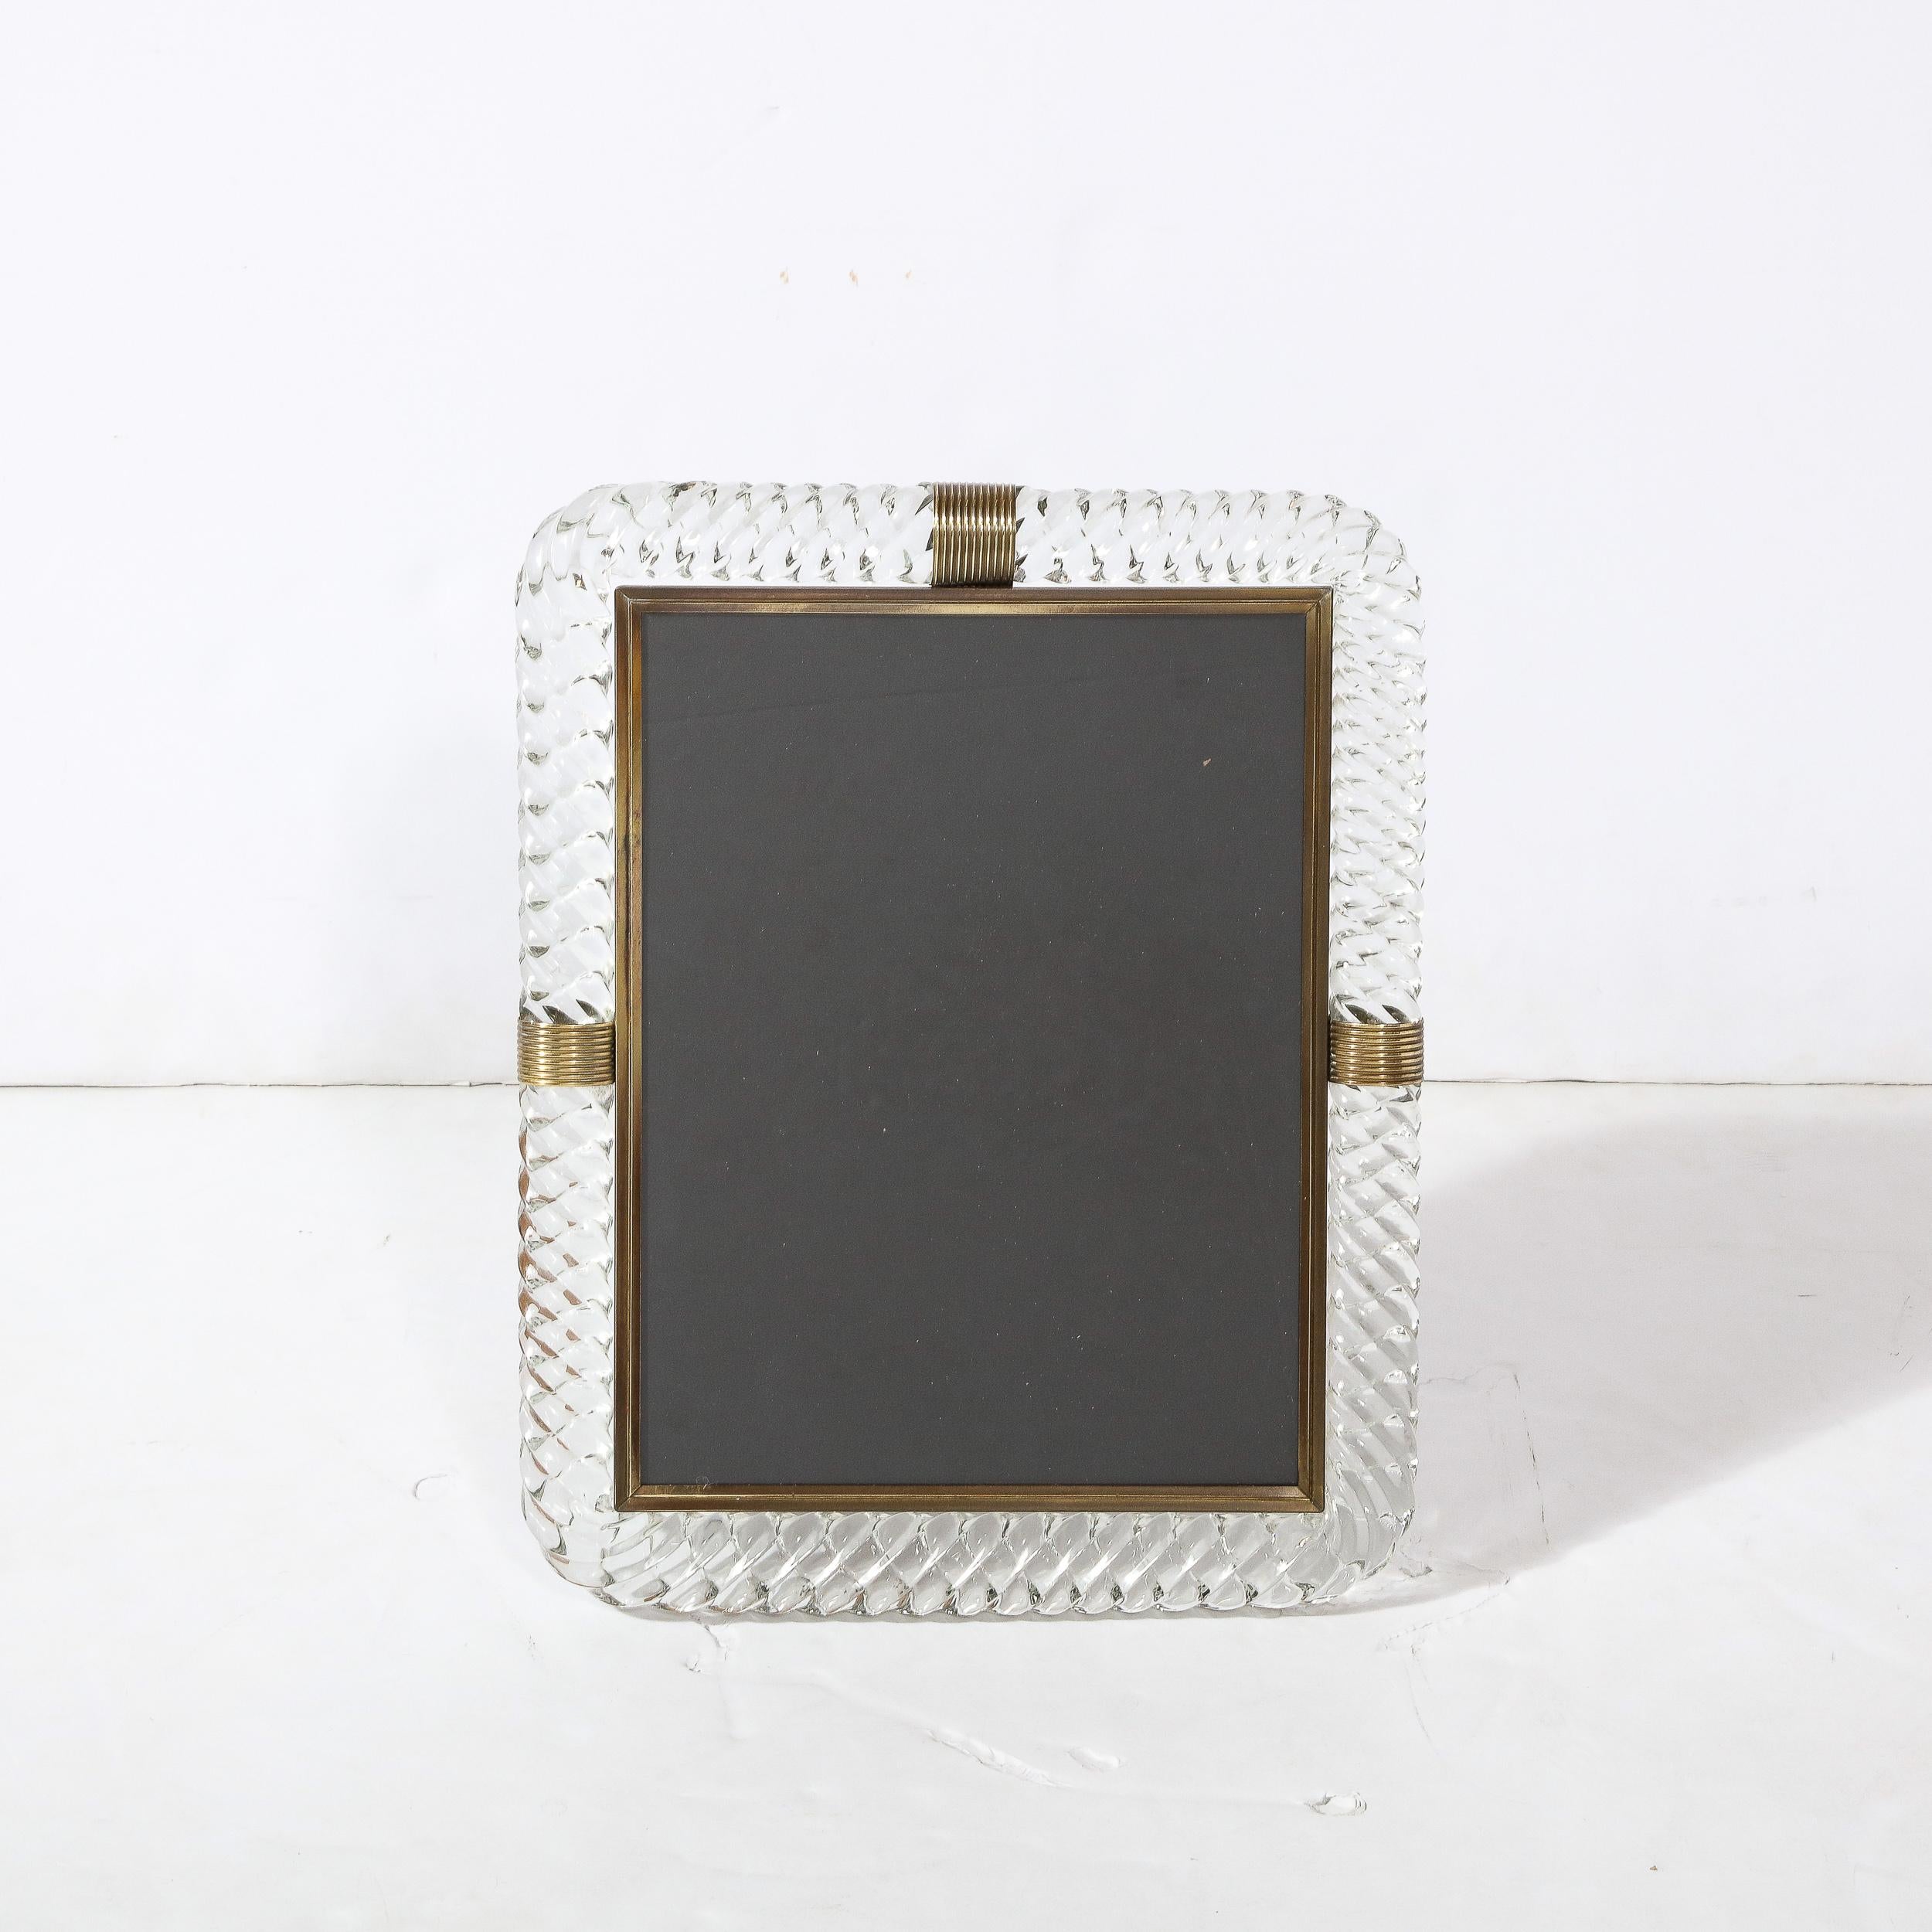 This stunning Mid-Century Modern picture frame was realized by the legendary atelier of Barovier e Toso in Murano, Italy circa 1960. It offers a rectangular form with rounded corners in Barovier's signature translucent braided glass offering a